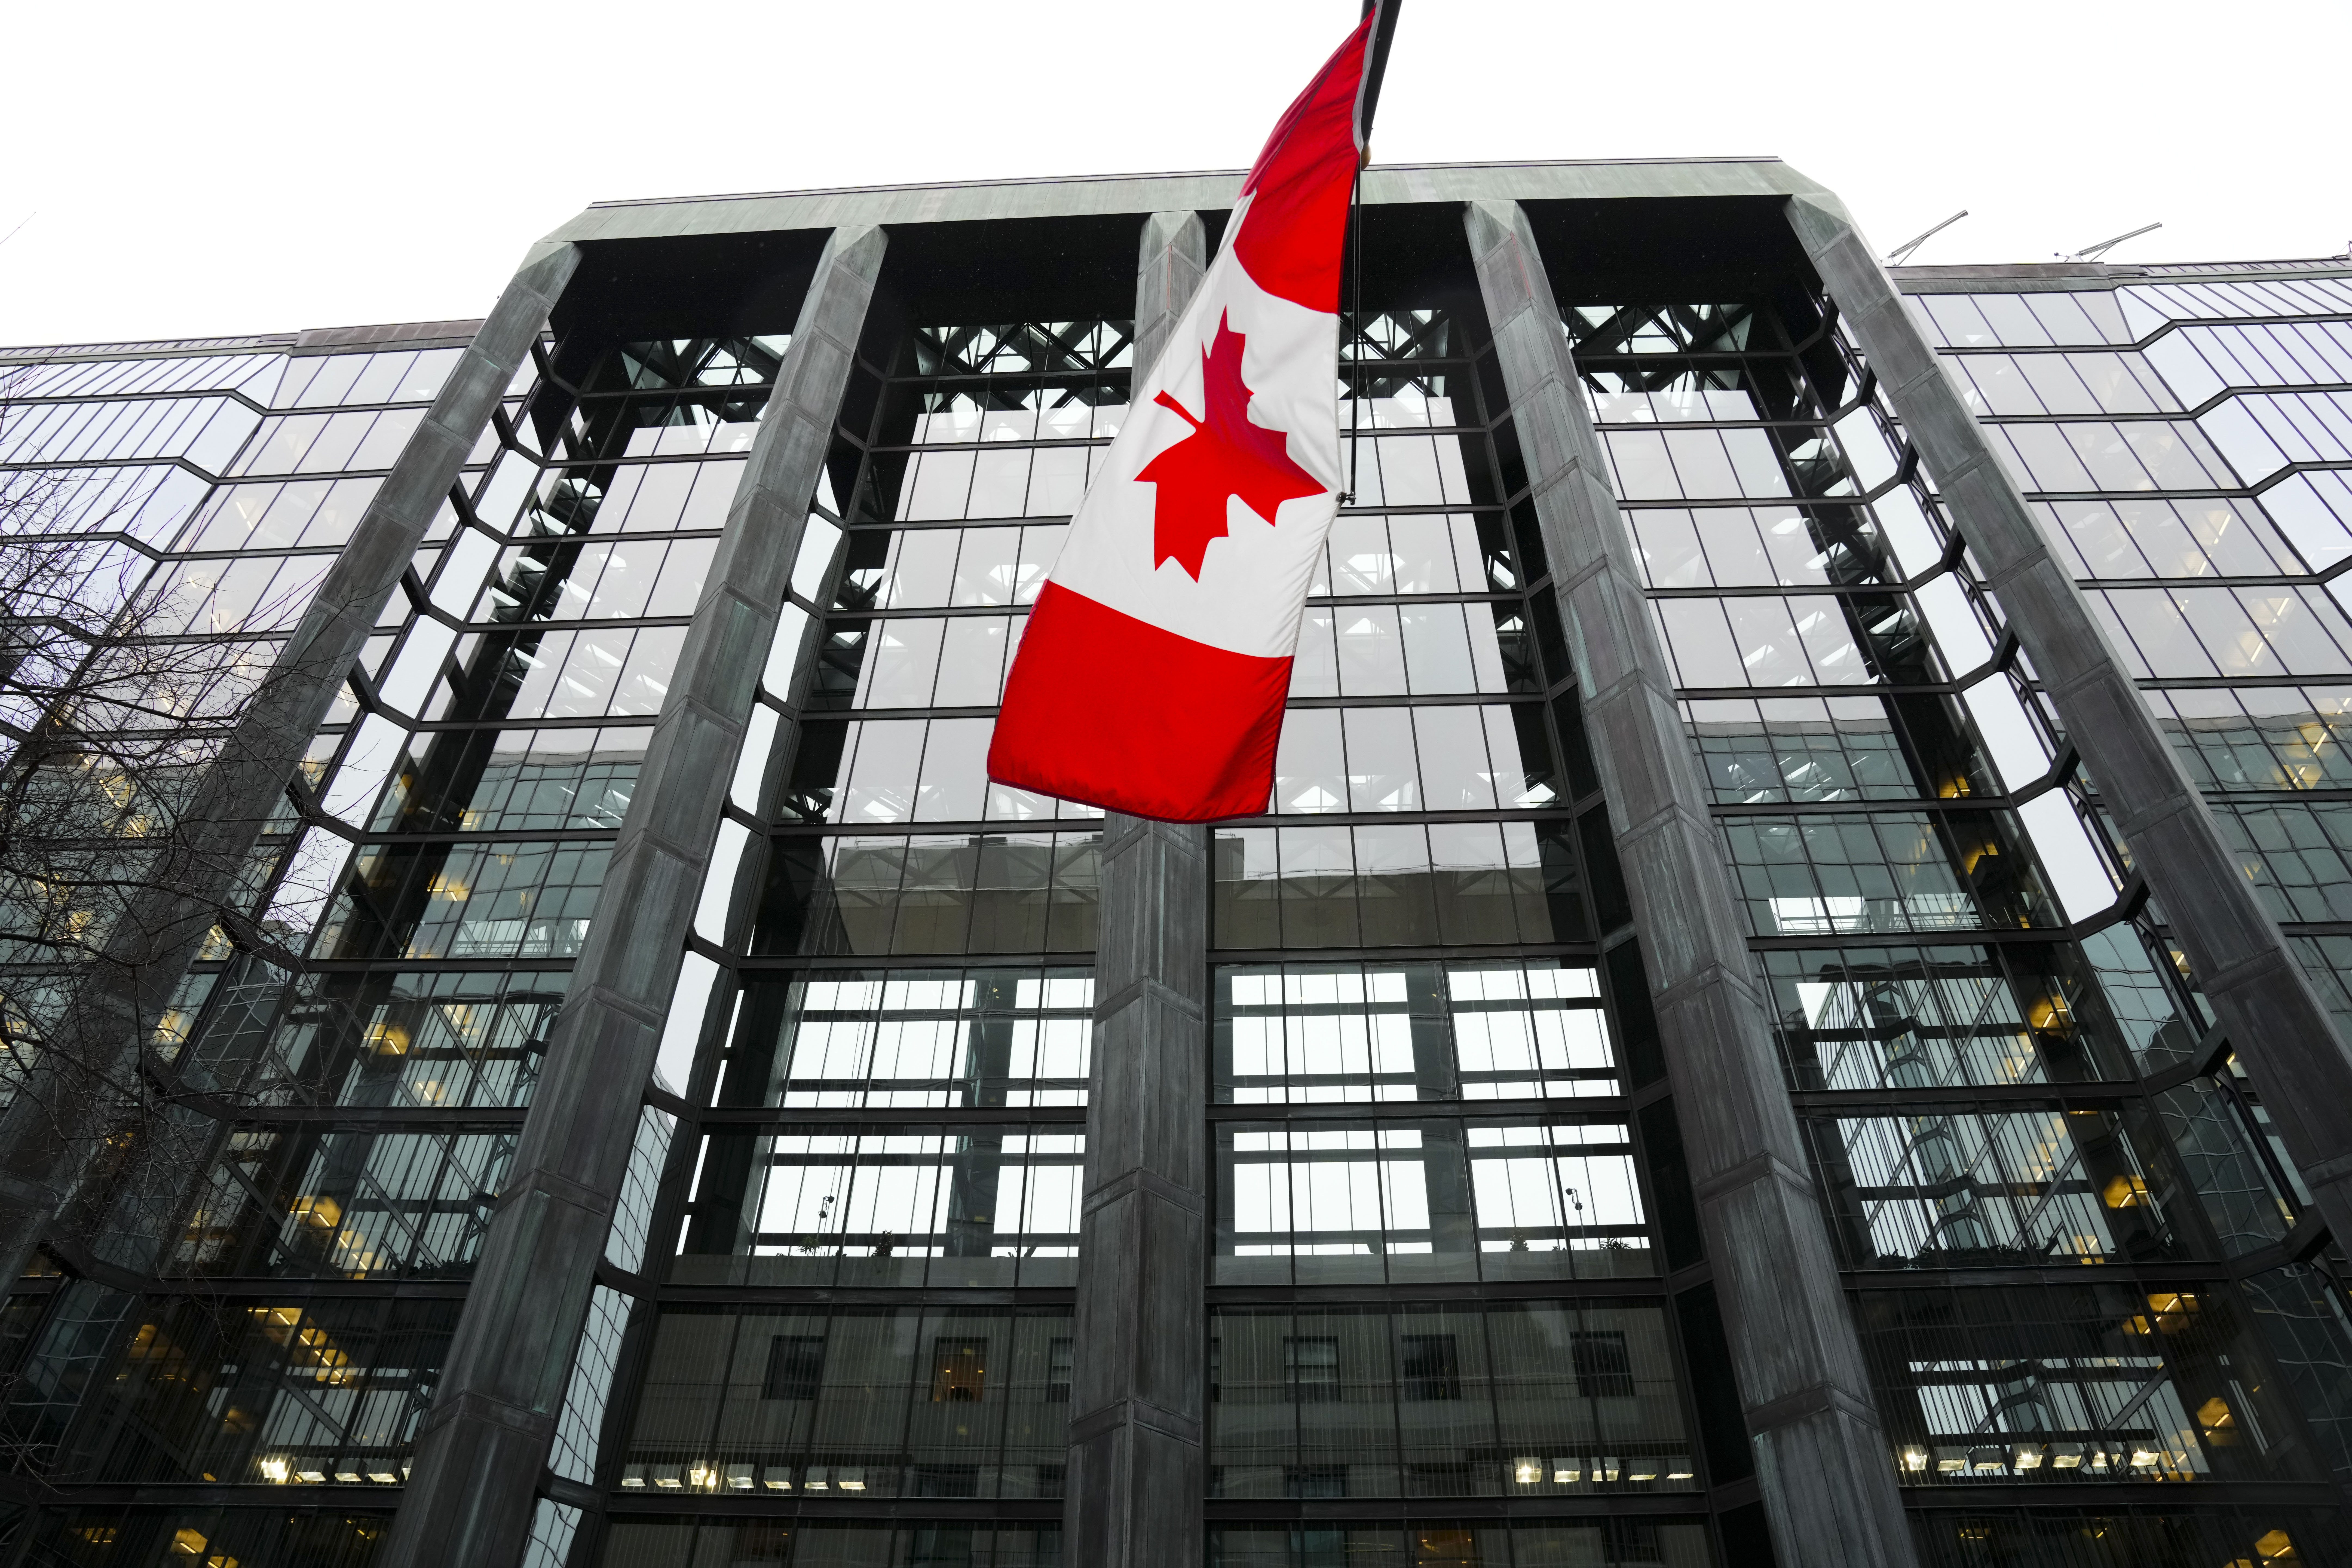 Bank of Canada deliberations show some felt rates may need to rise higher